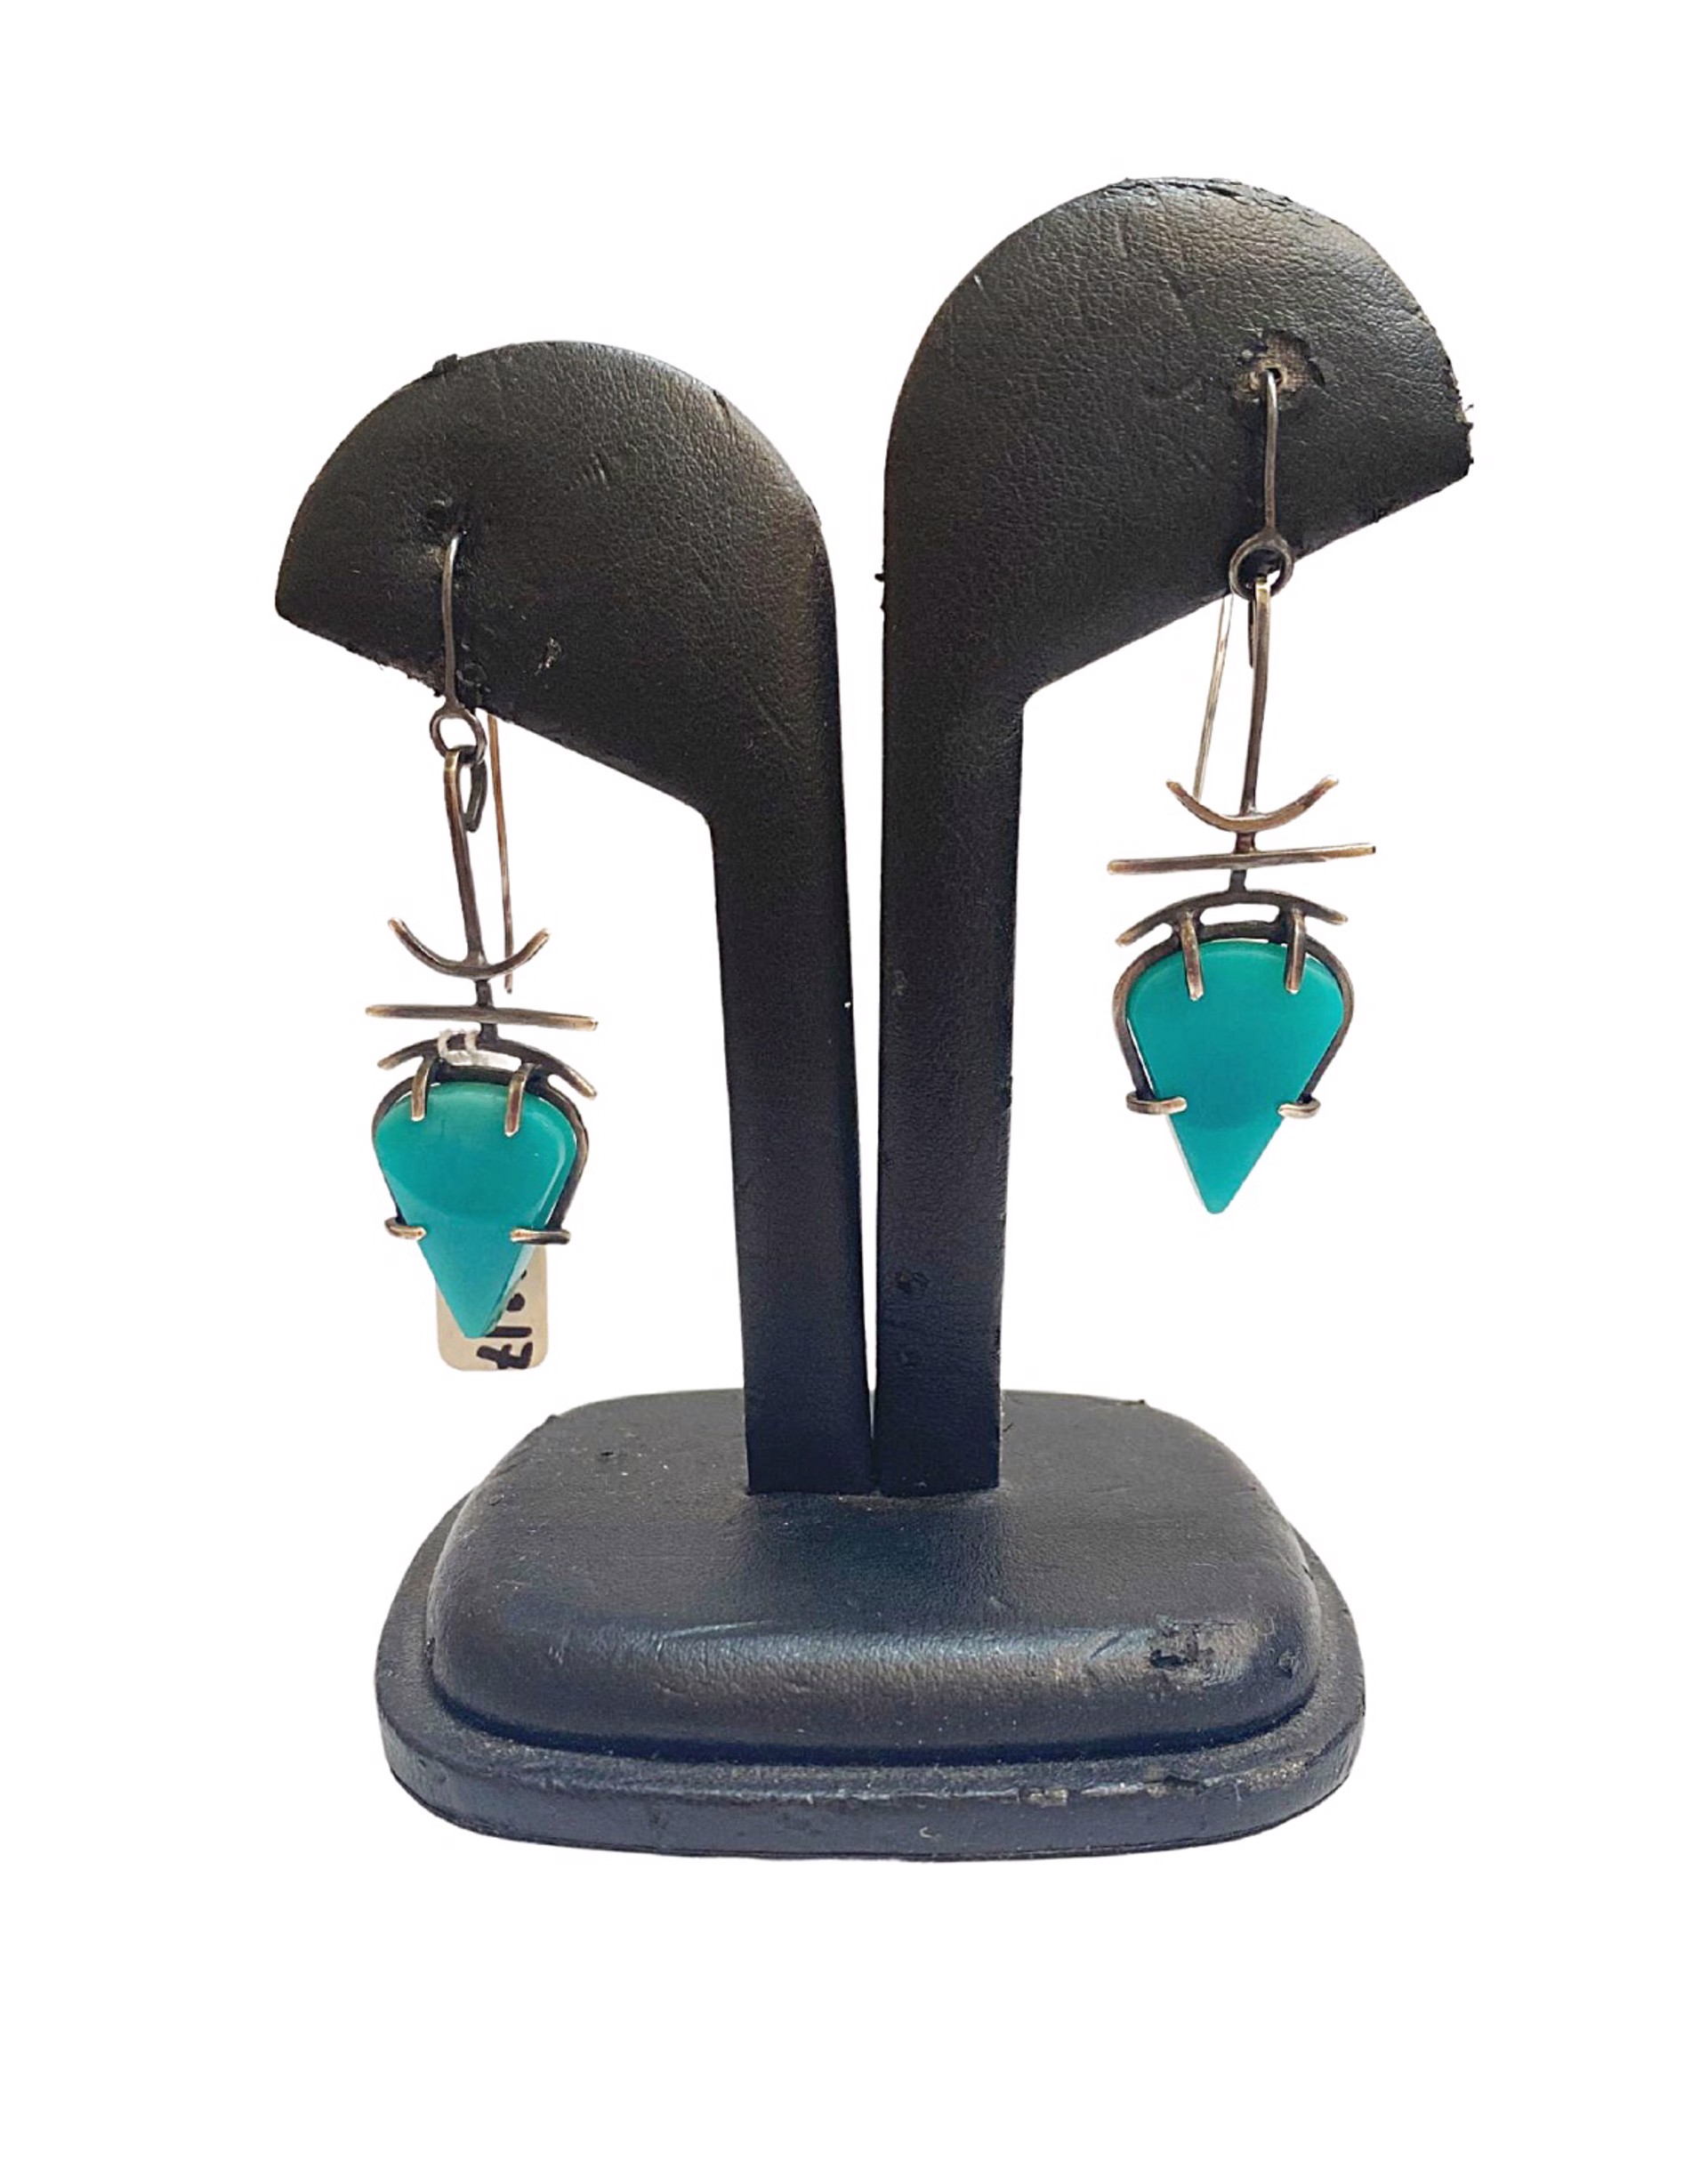 Earrings - Chrysocolla with Sterling Silver Wires AC 317 by Annette Campbell